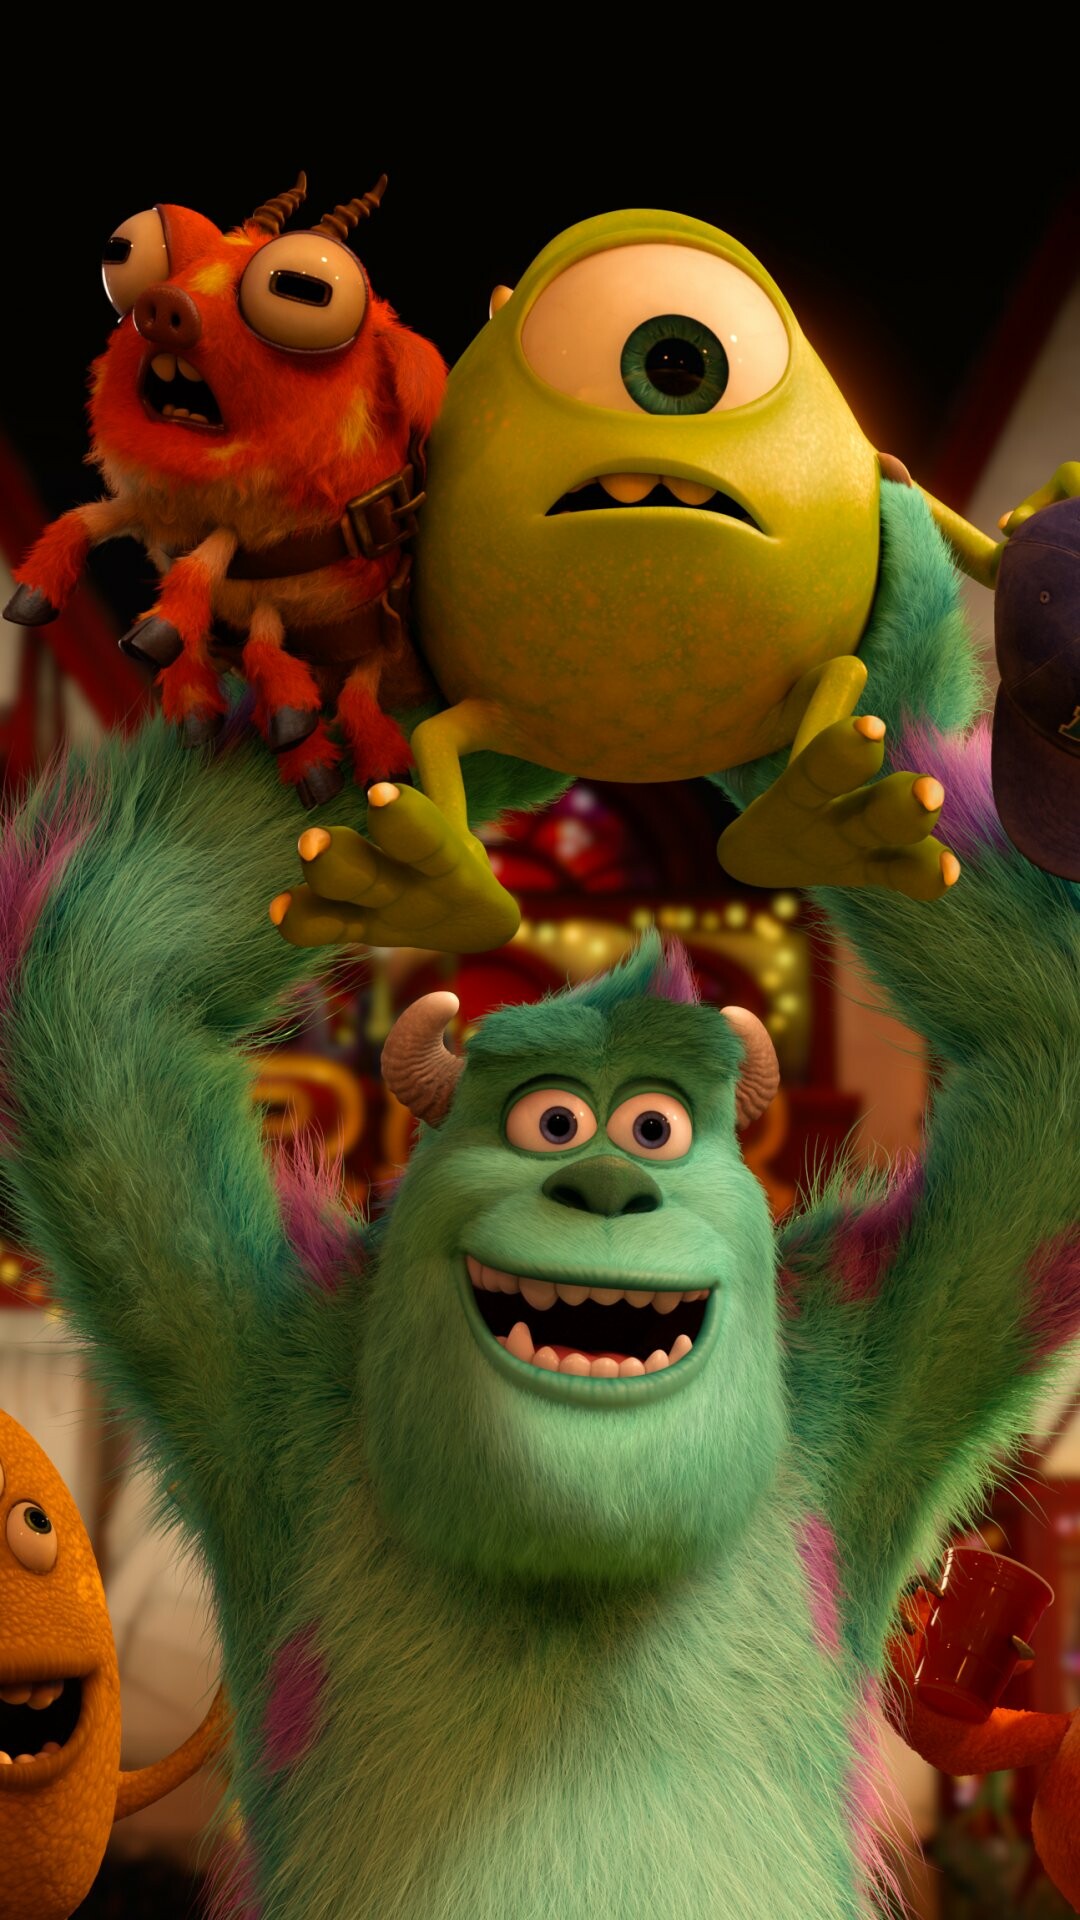 Monsters, Inc.: The name of a Pixar movie and franchise, Mike, Sulley. 1080x1920 Full HD Background.